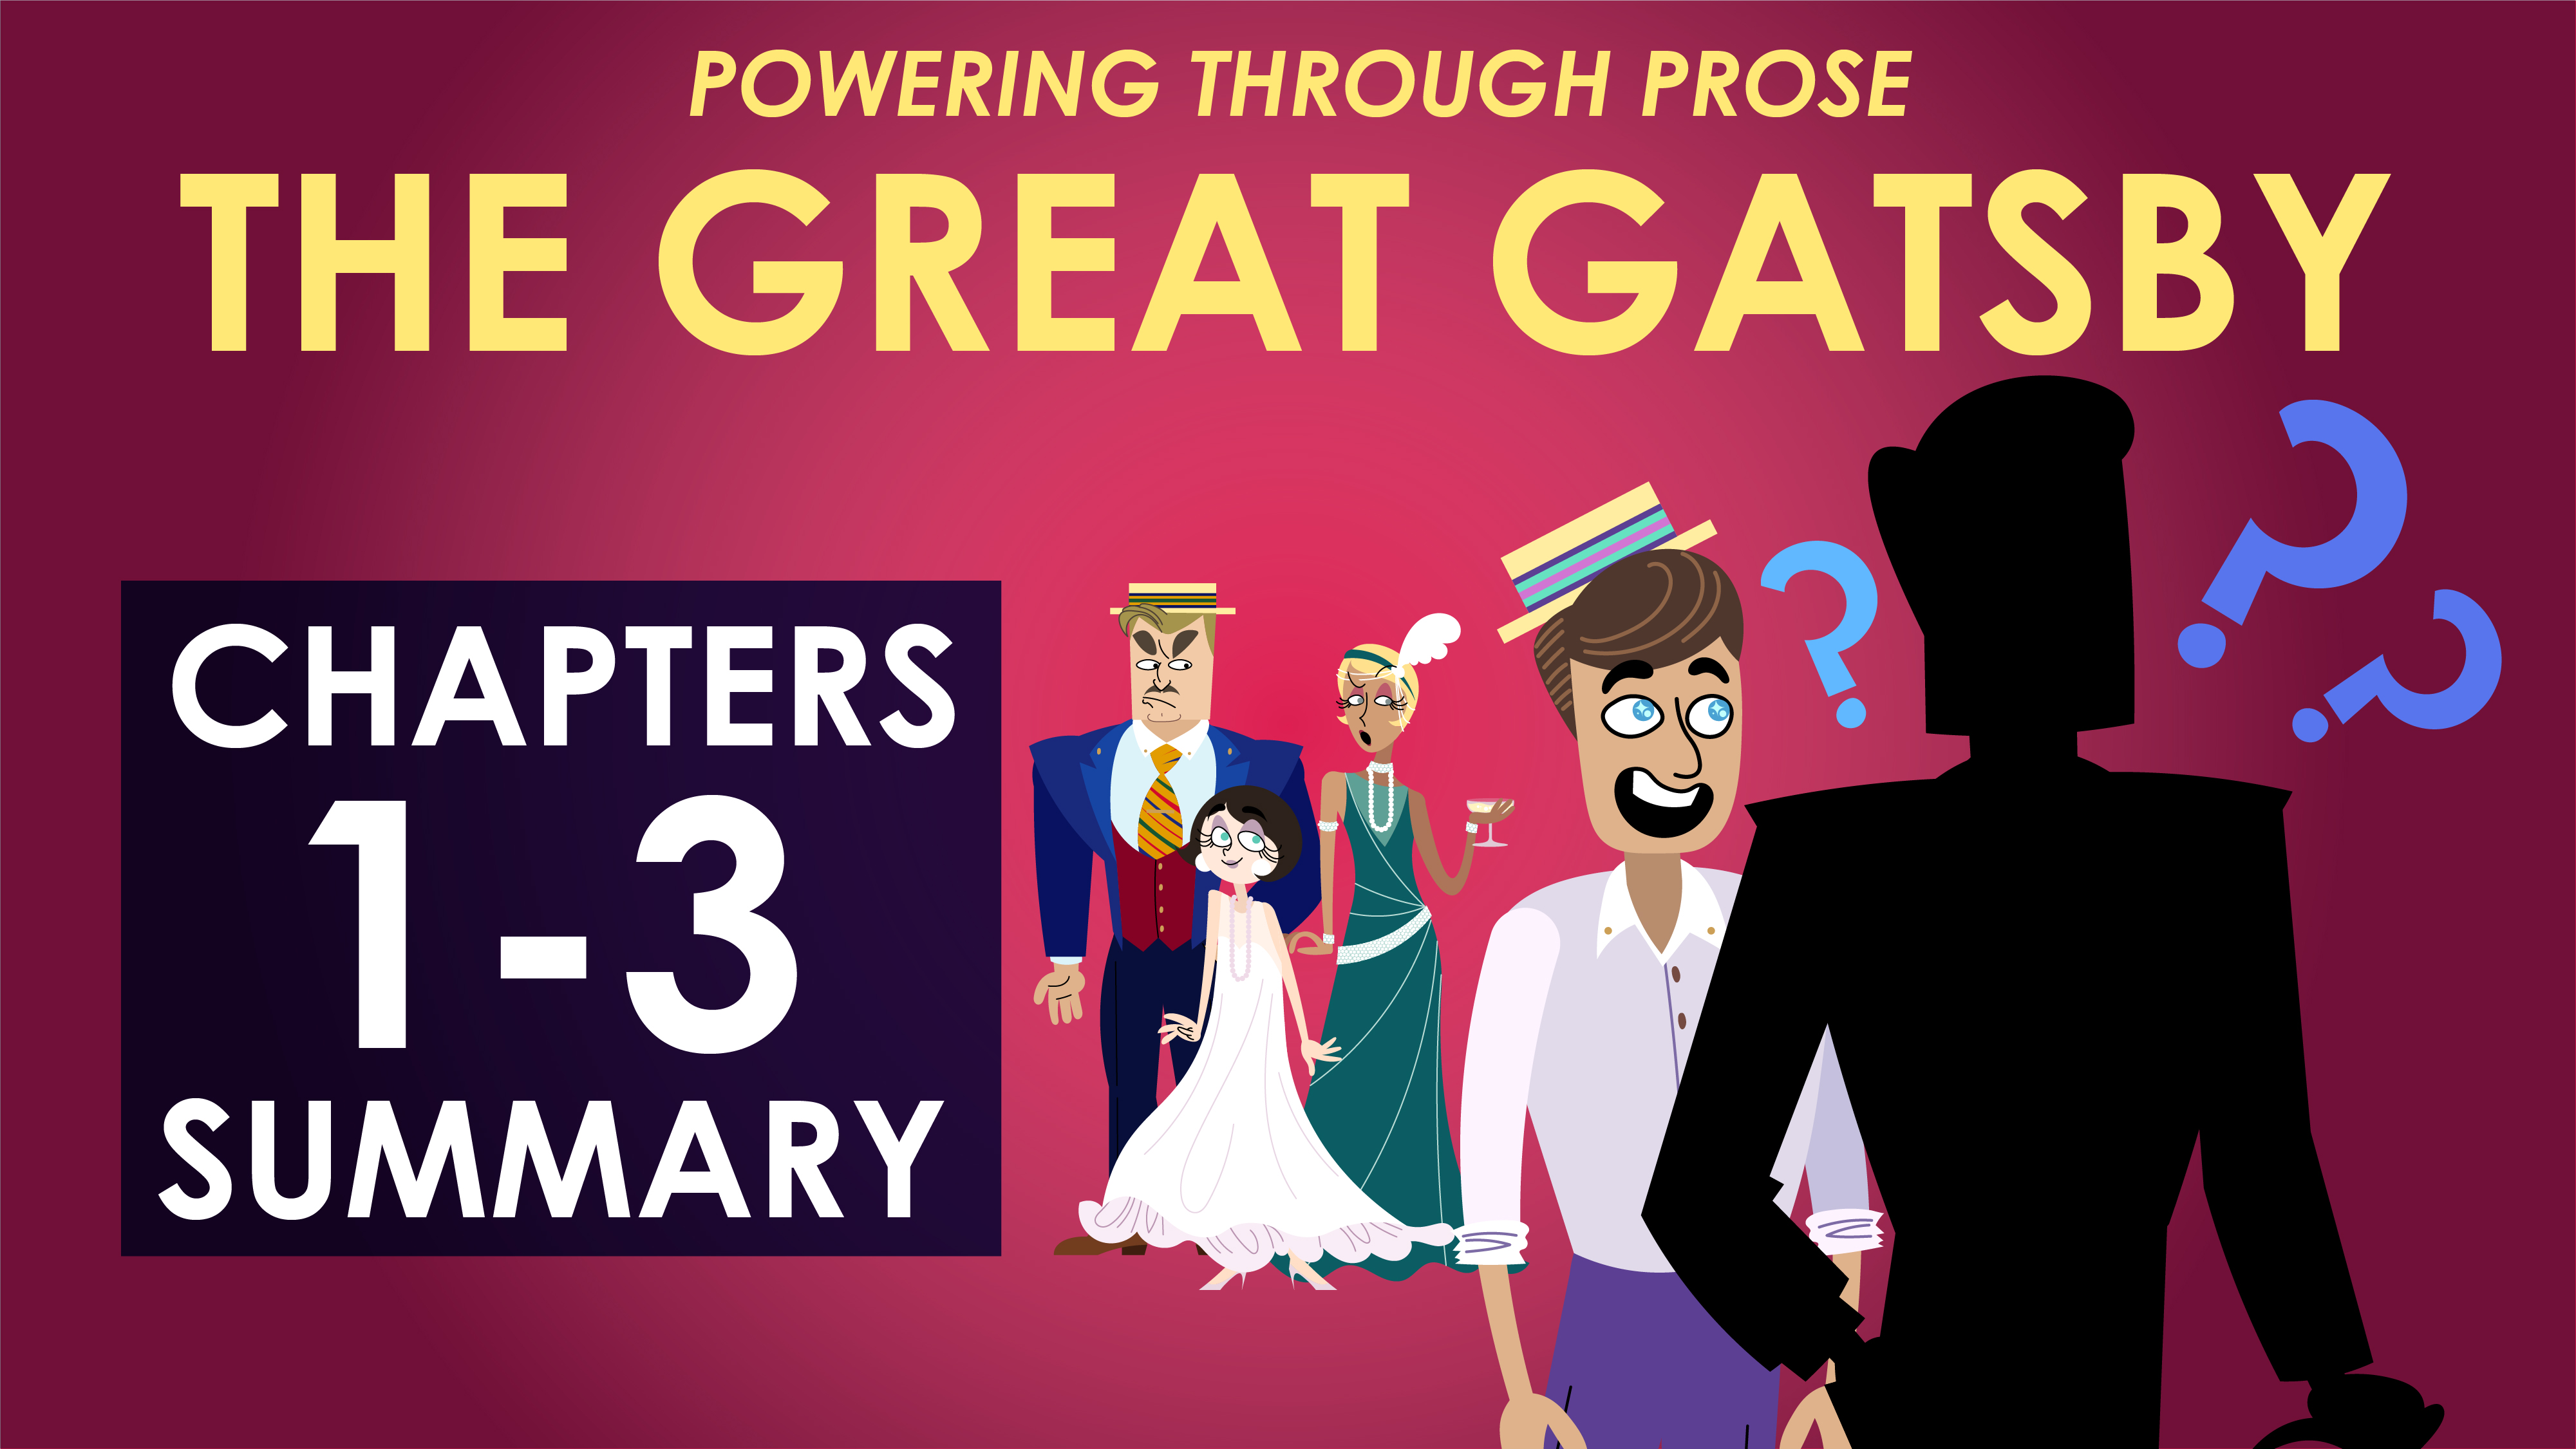 The Great Gatsby - F. Scott Fitzgerald - Chapters 1-3 Summary - Powering Through Prose Series